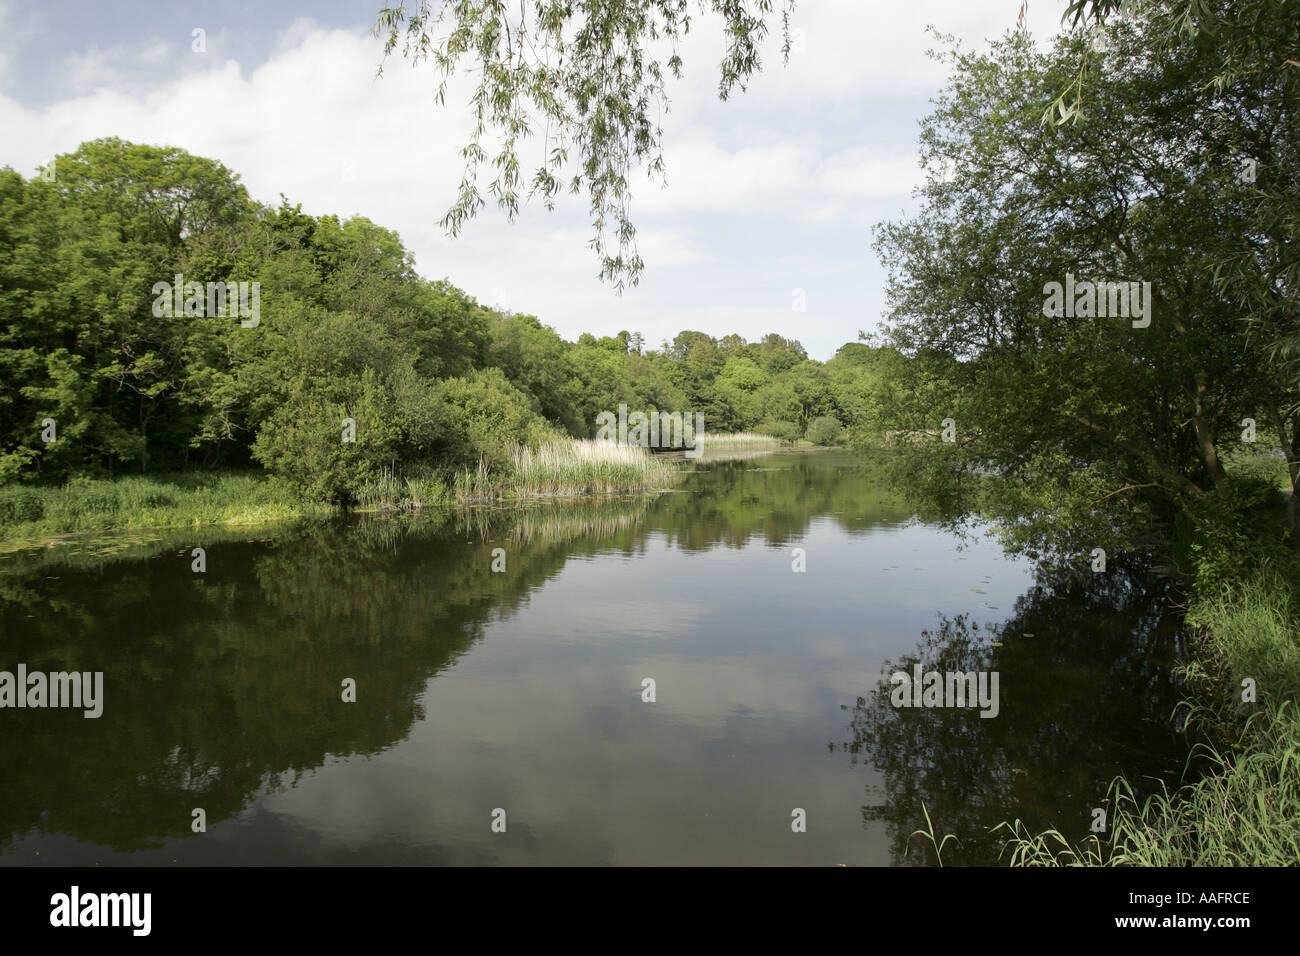 Quoile river near downpatrick county down northern ireland Stock Photo